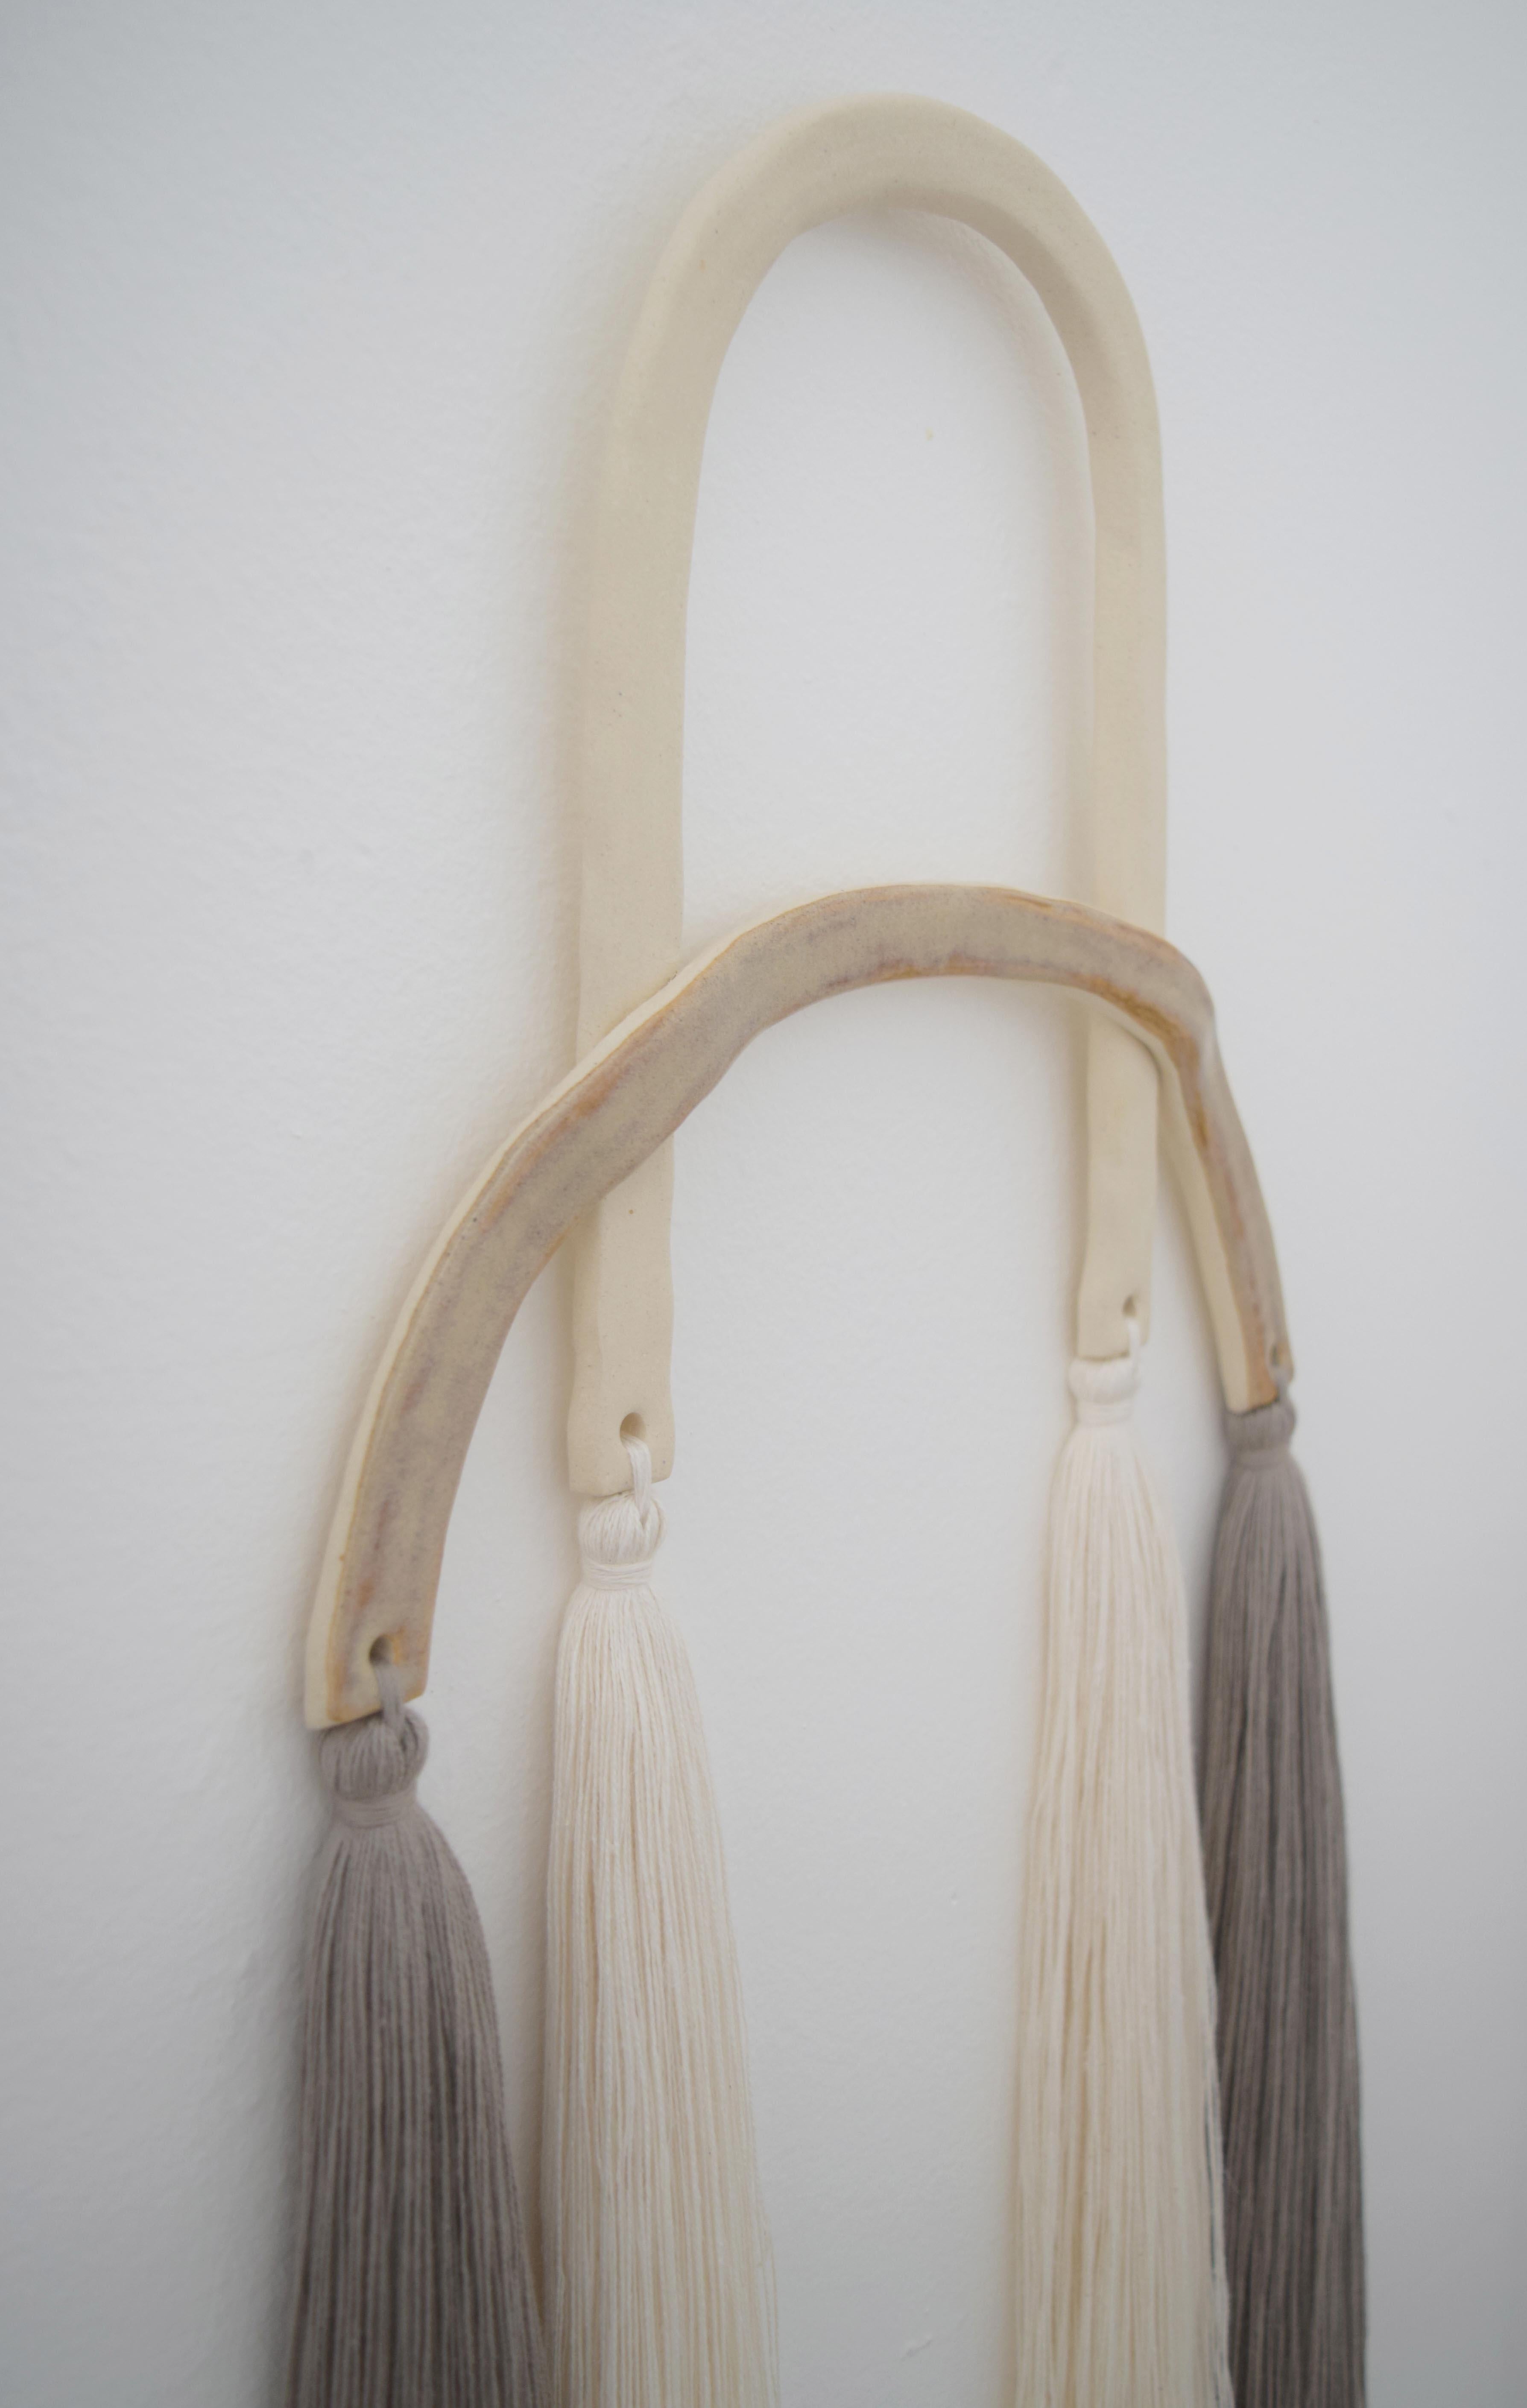 Wall sculpture #530 by Karen Gayle Tinney

Wall sculpture in mixed materials of ceramic and cotton fibers. A ceramic frame, partially unglazed stoneware, and partially glazed in speckled gray is finished off in lengthy cotton fringe. The sculpture